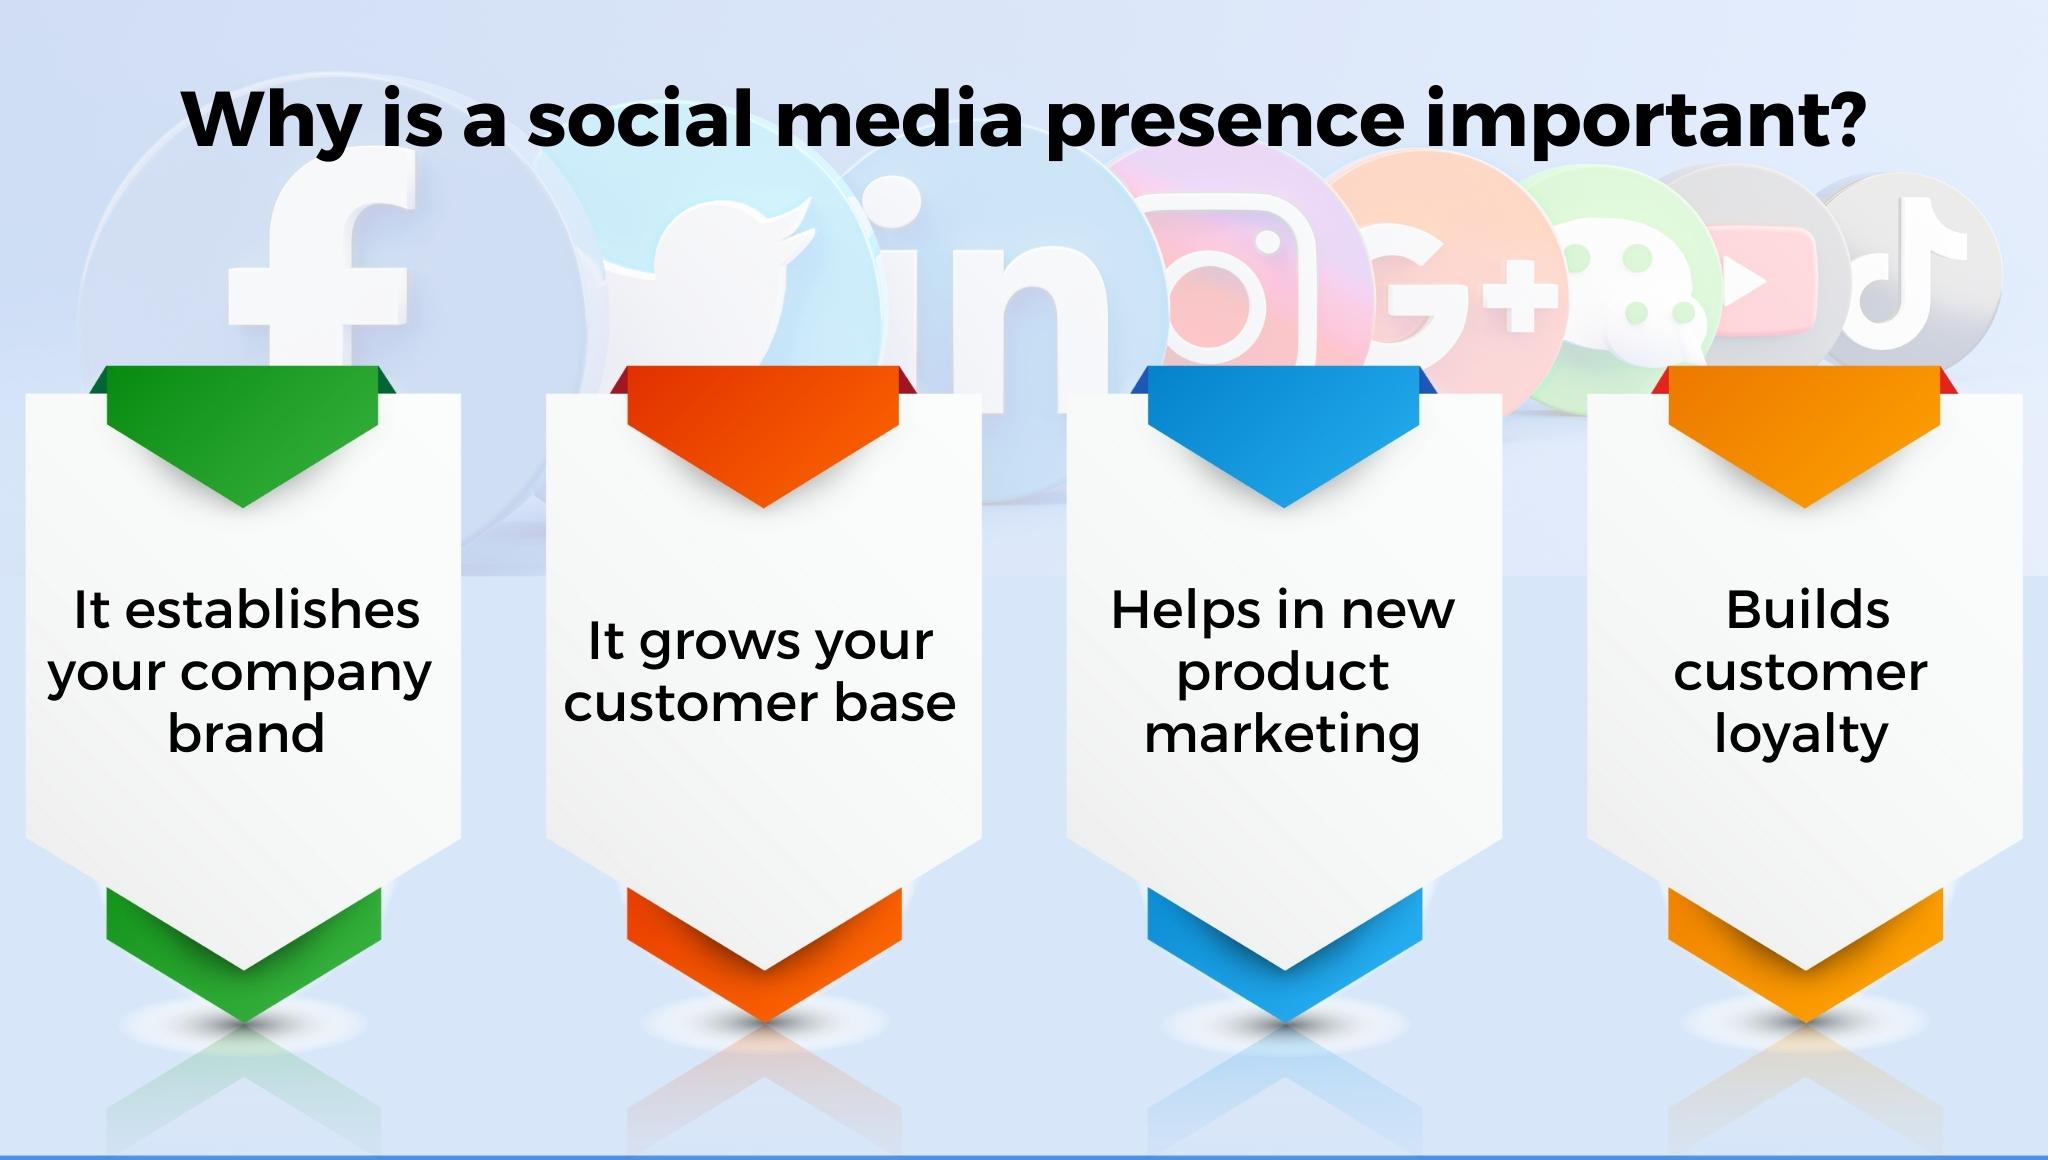 Why is a social media presence important